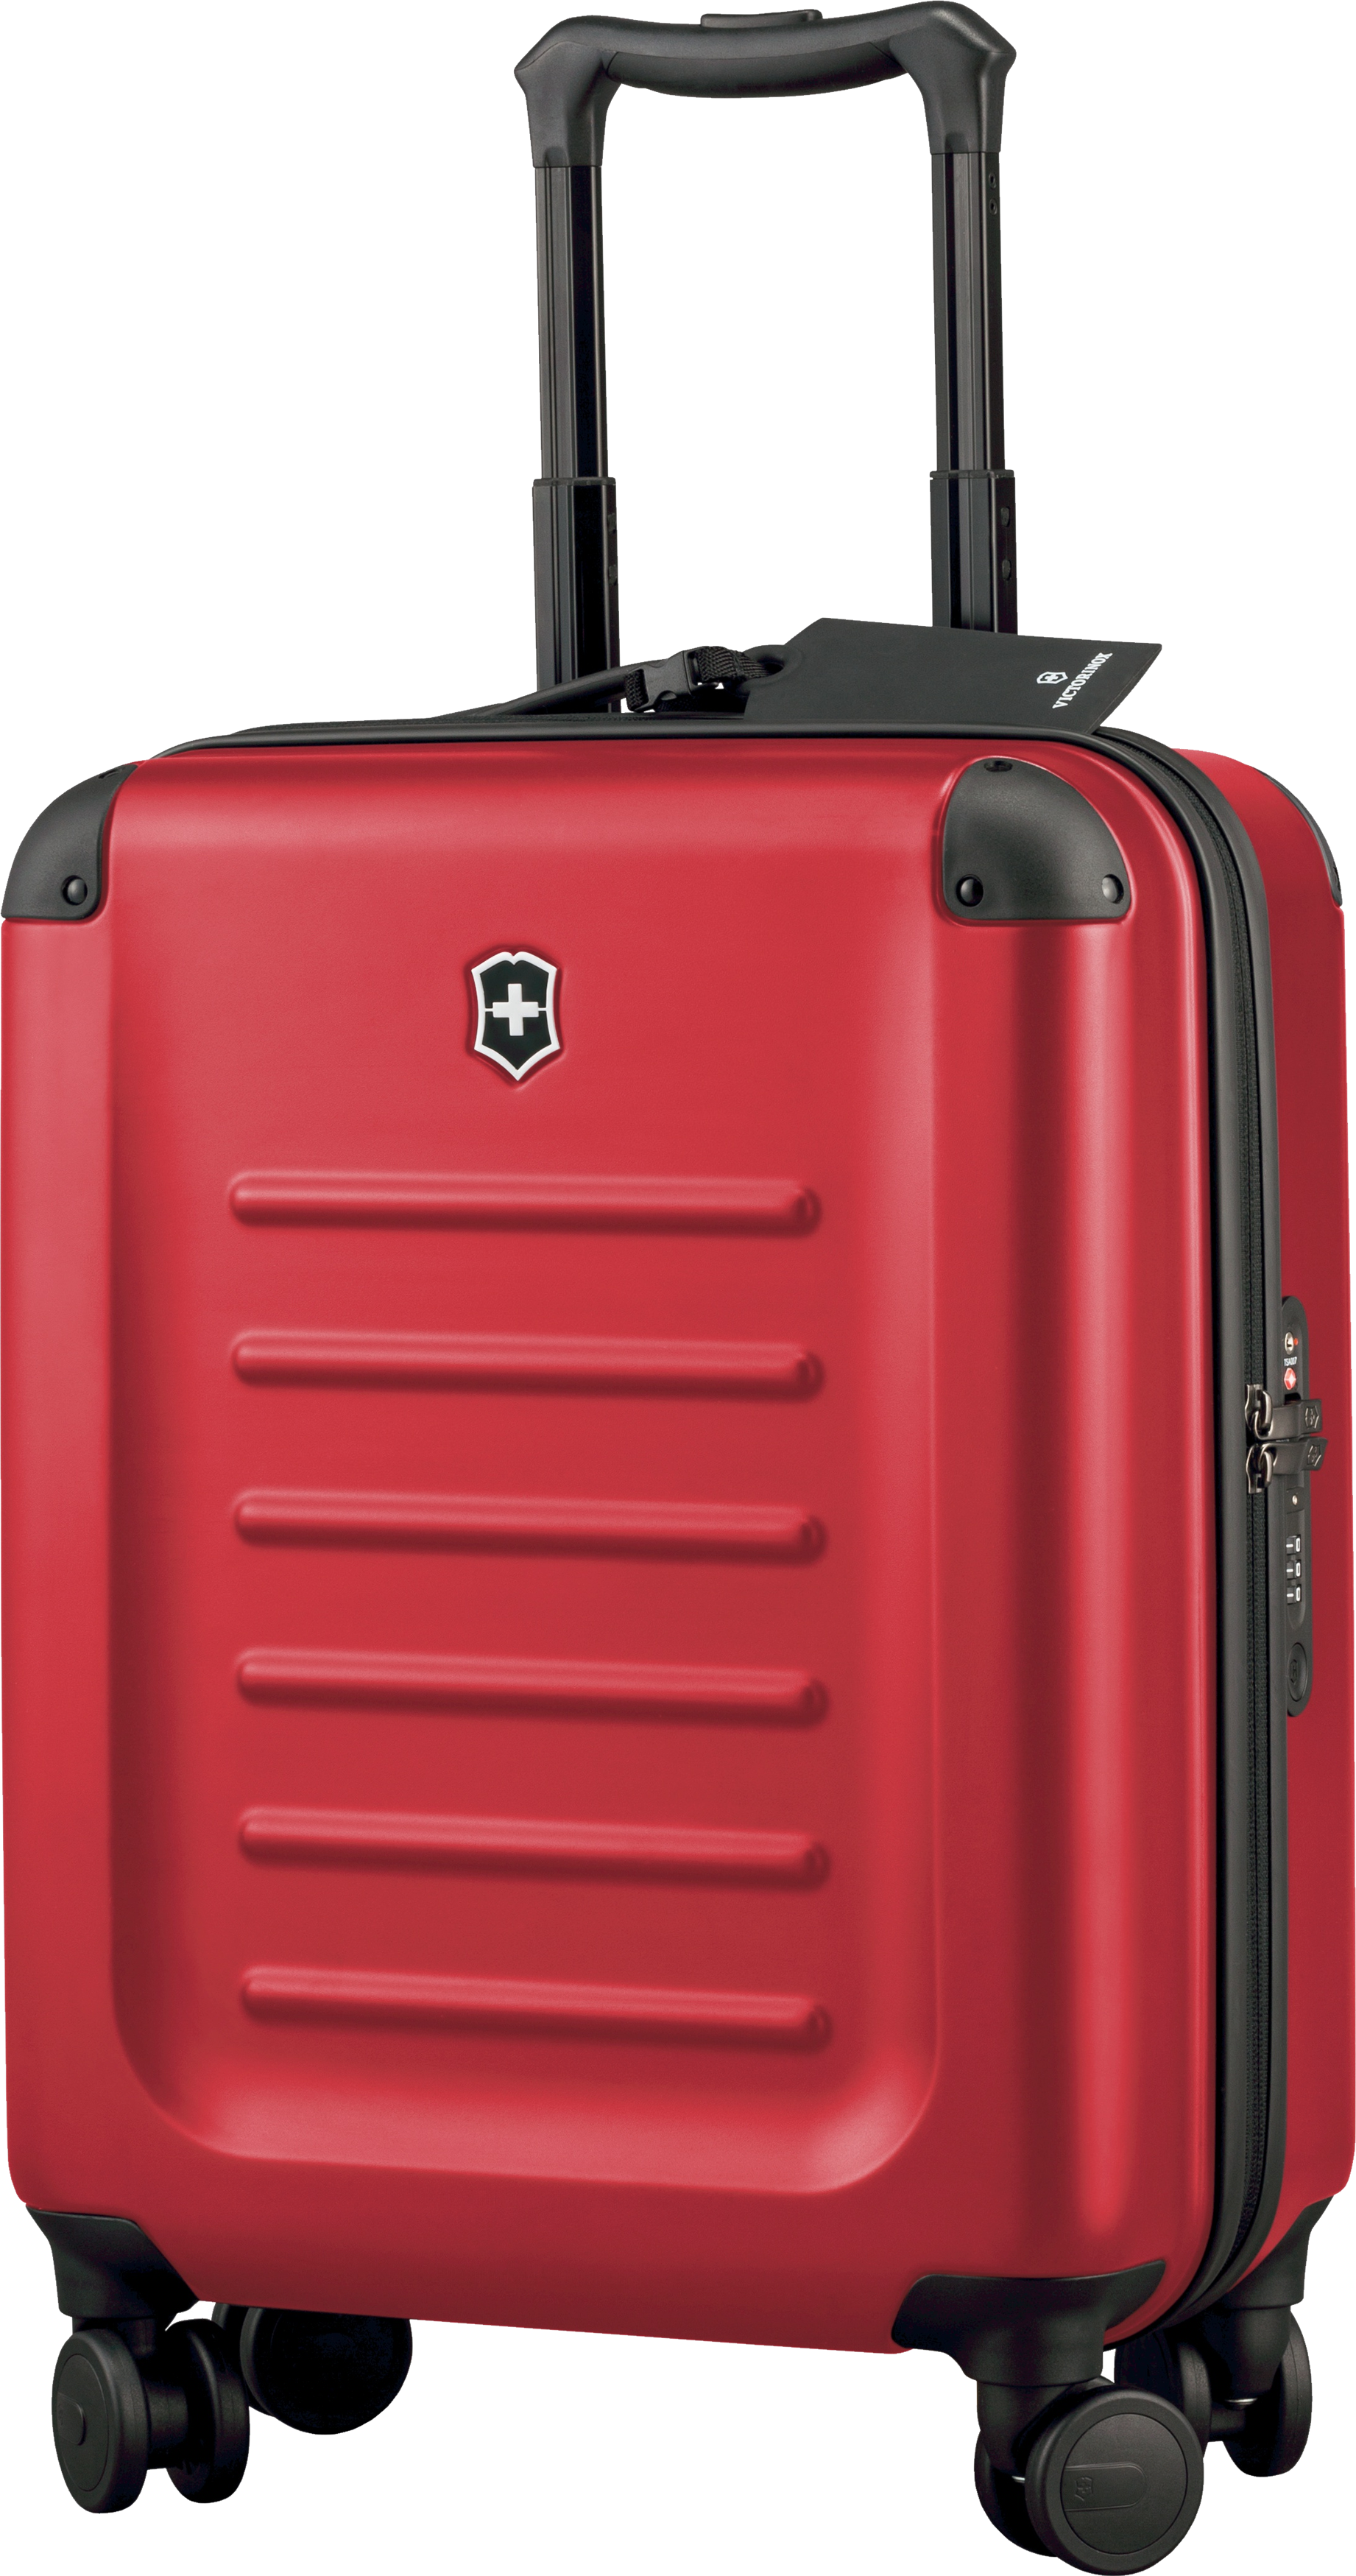 Luggage Png Image - Luggage, Transparent background PNG HD thumbnail